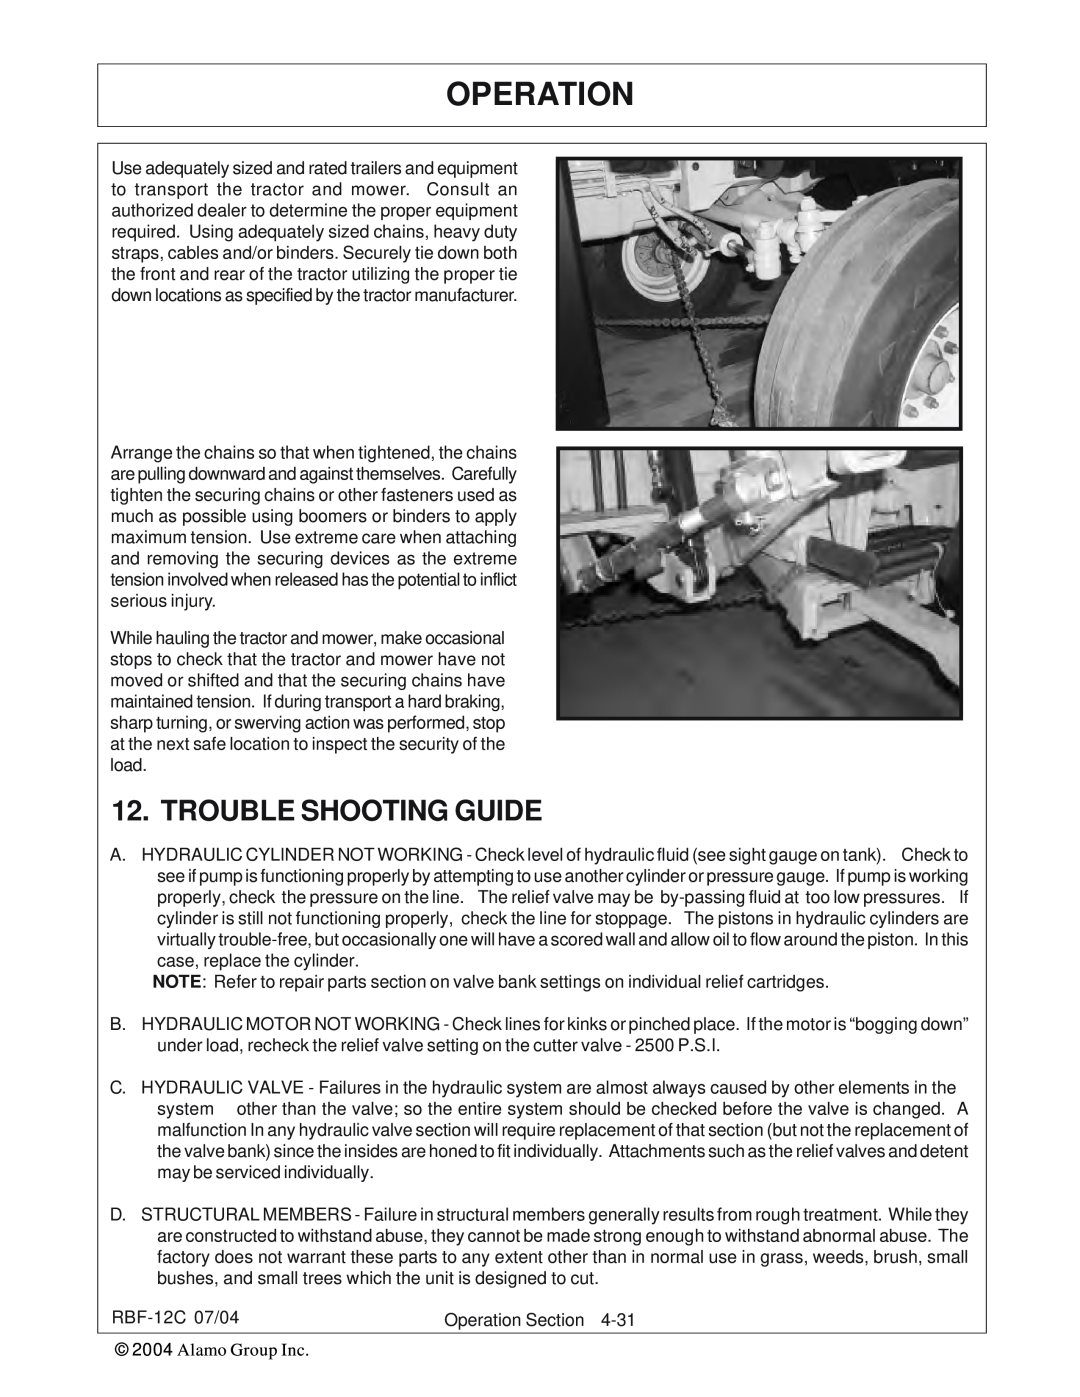 Tiger Products Co., Ltd RBF-12C manual Trouble Shooting Guide, Operation 